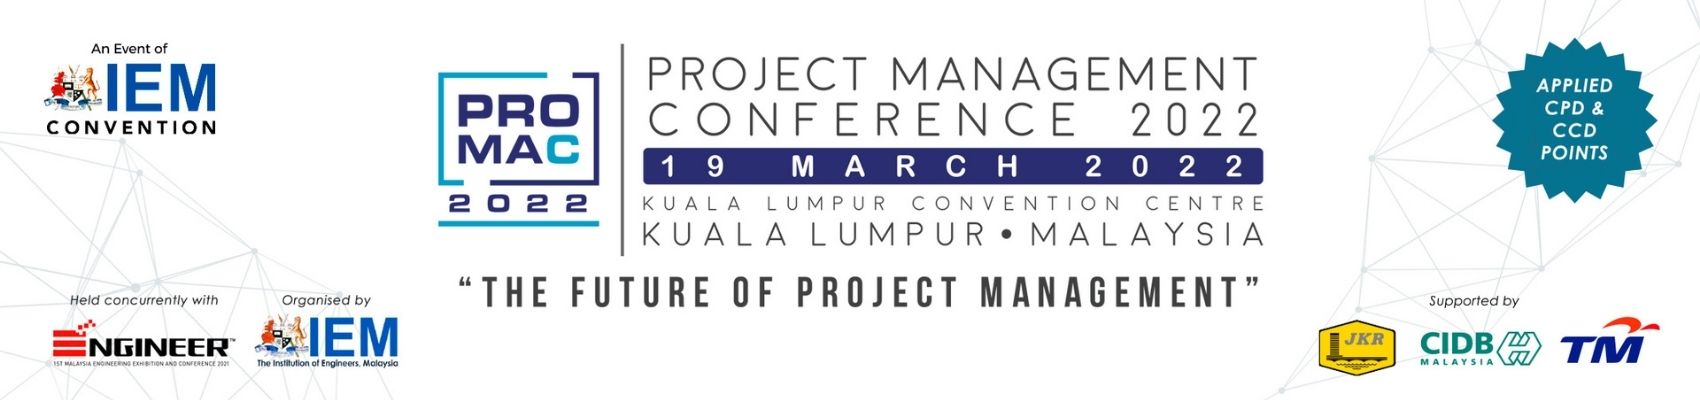 Project Management Conference 2022 - The Future of Project Management